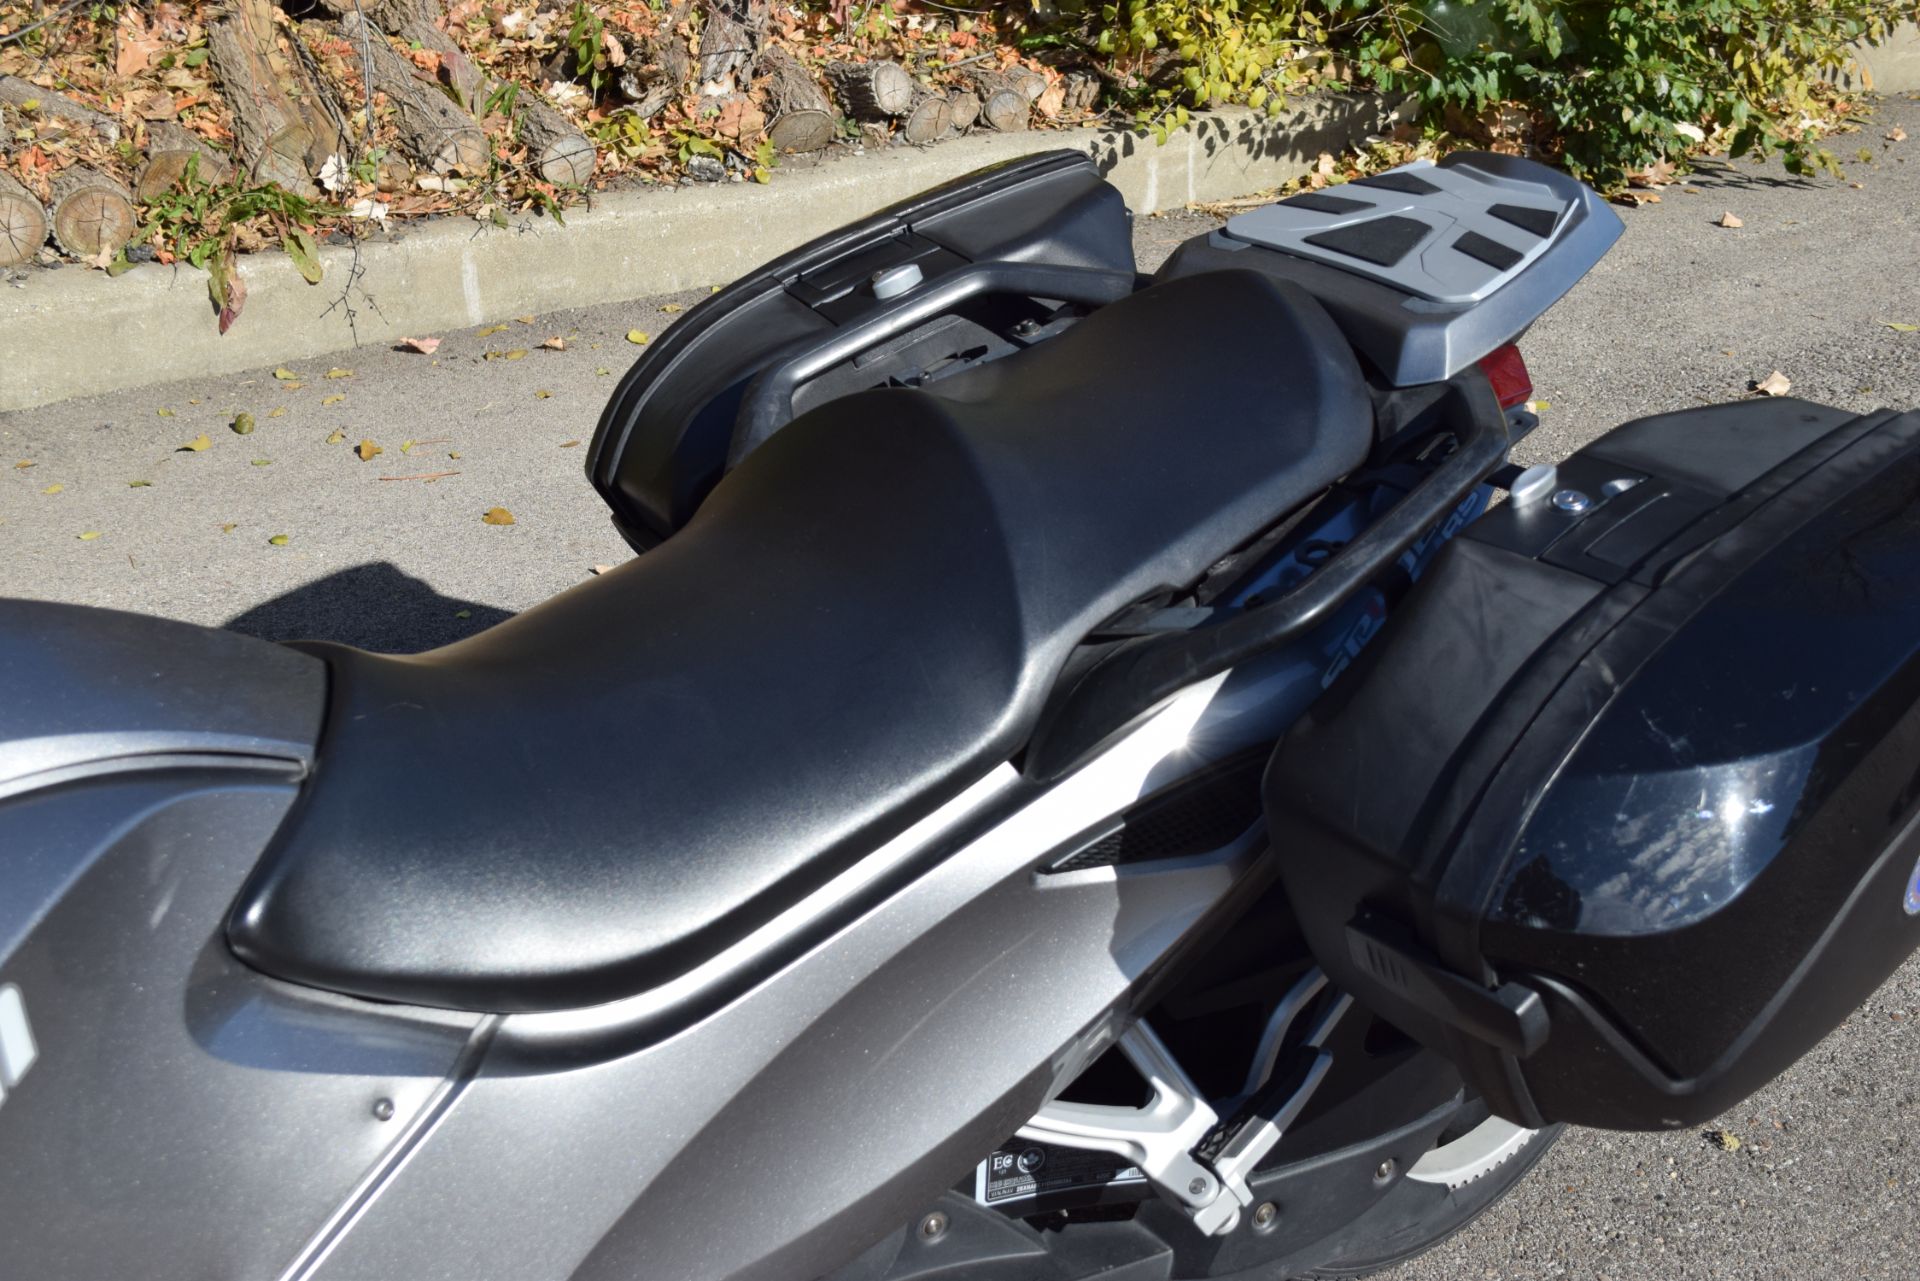 2013 Can-Am Spyder® RS-S SE5 in Wauconda, Illinois - Photo 18